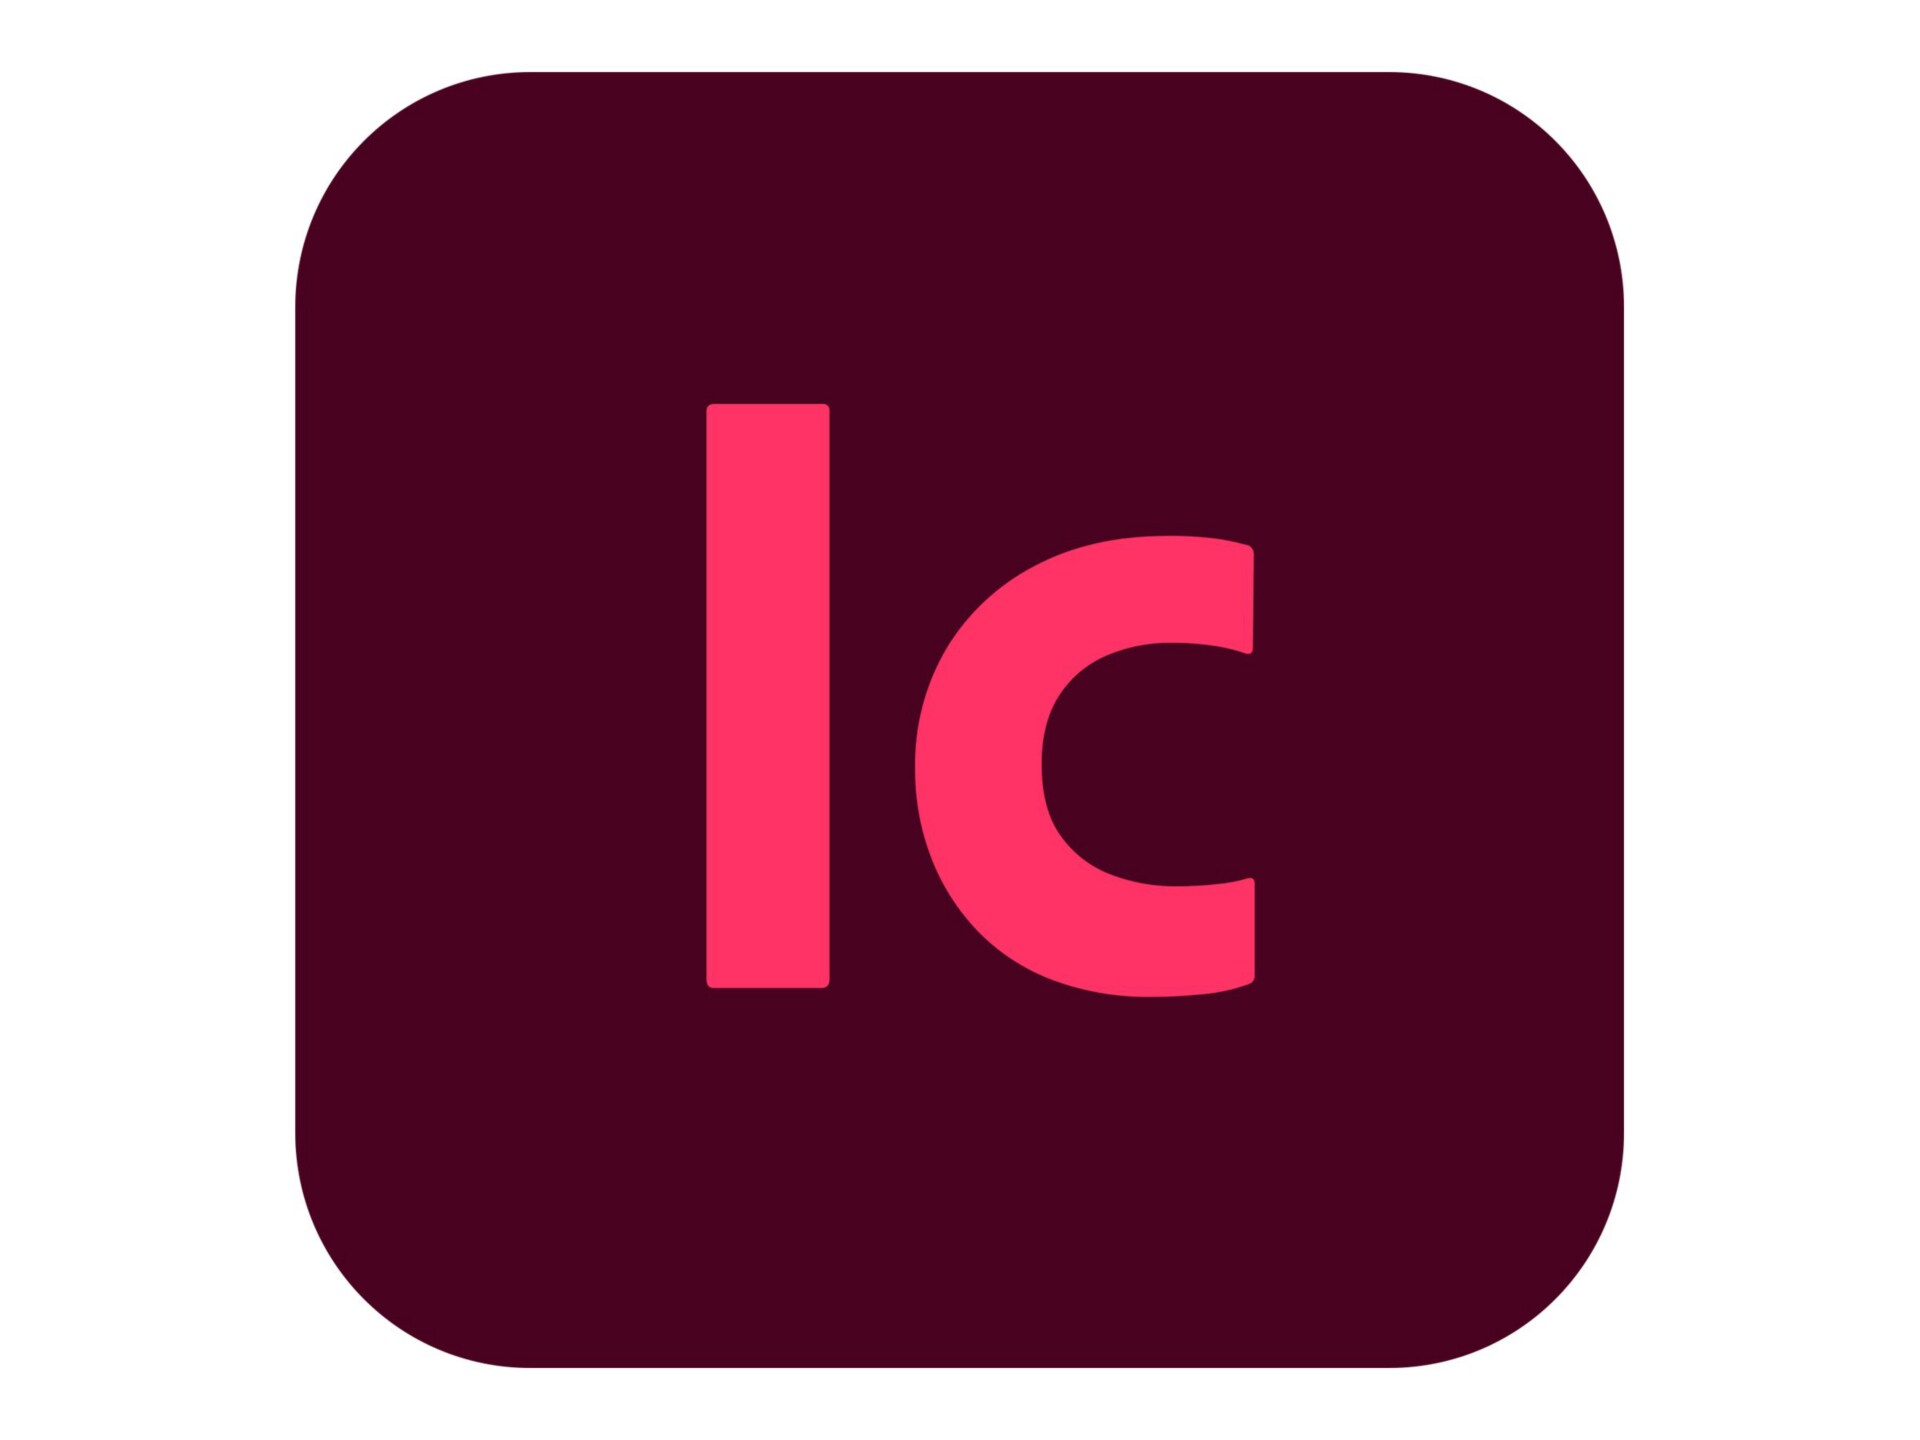 Adobe InCopy CC - Subscription New (3 months) - 1 user